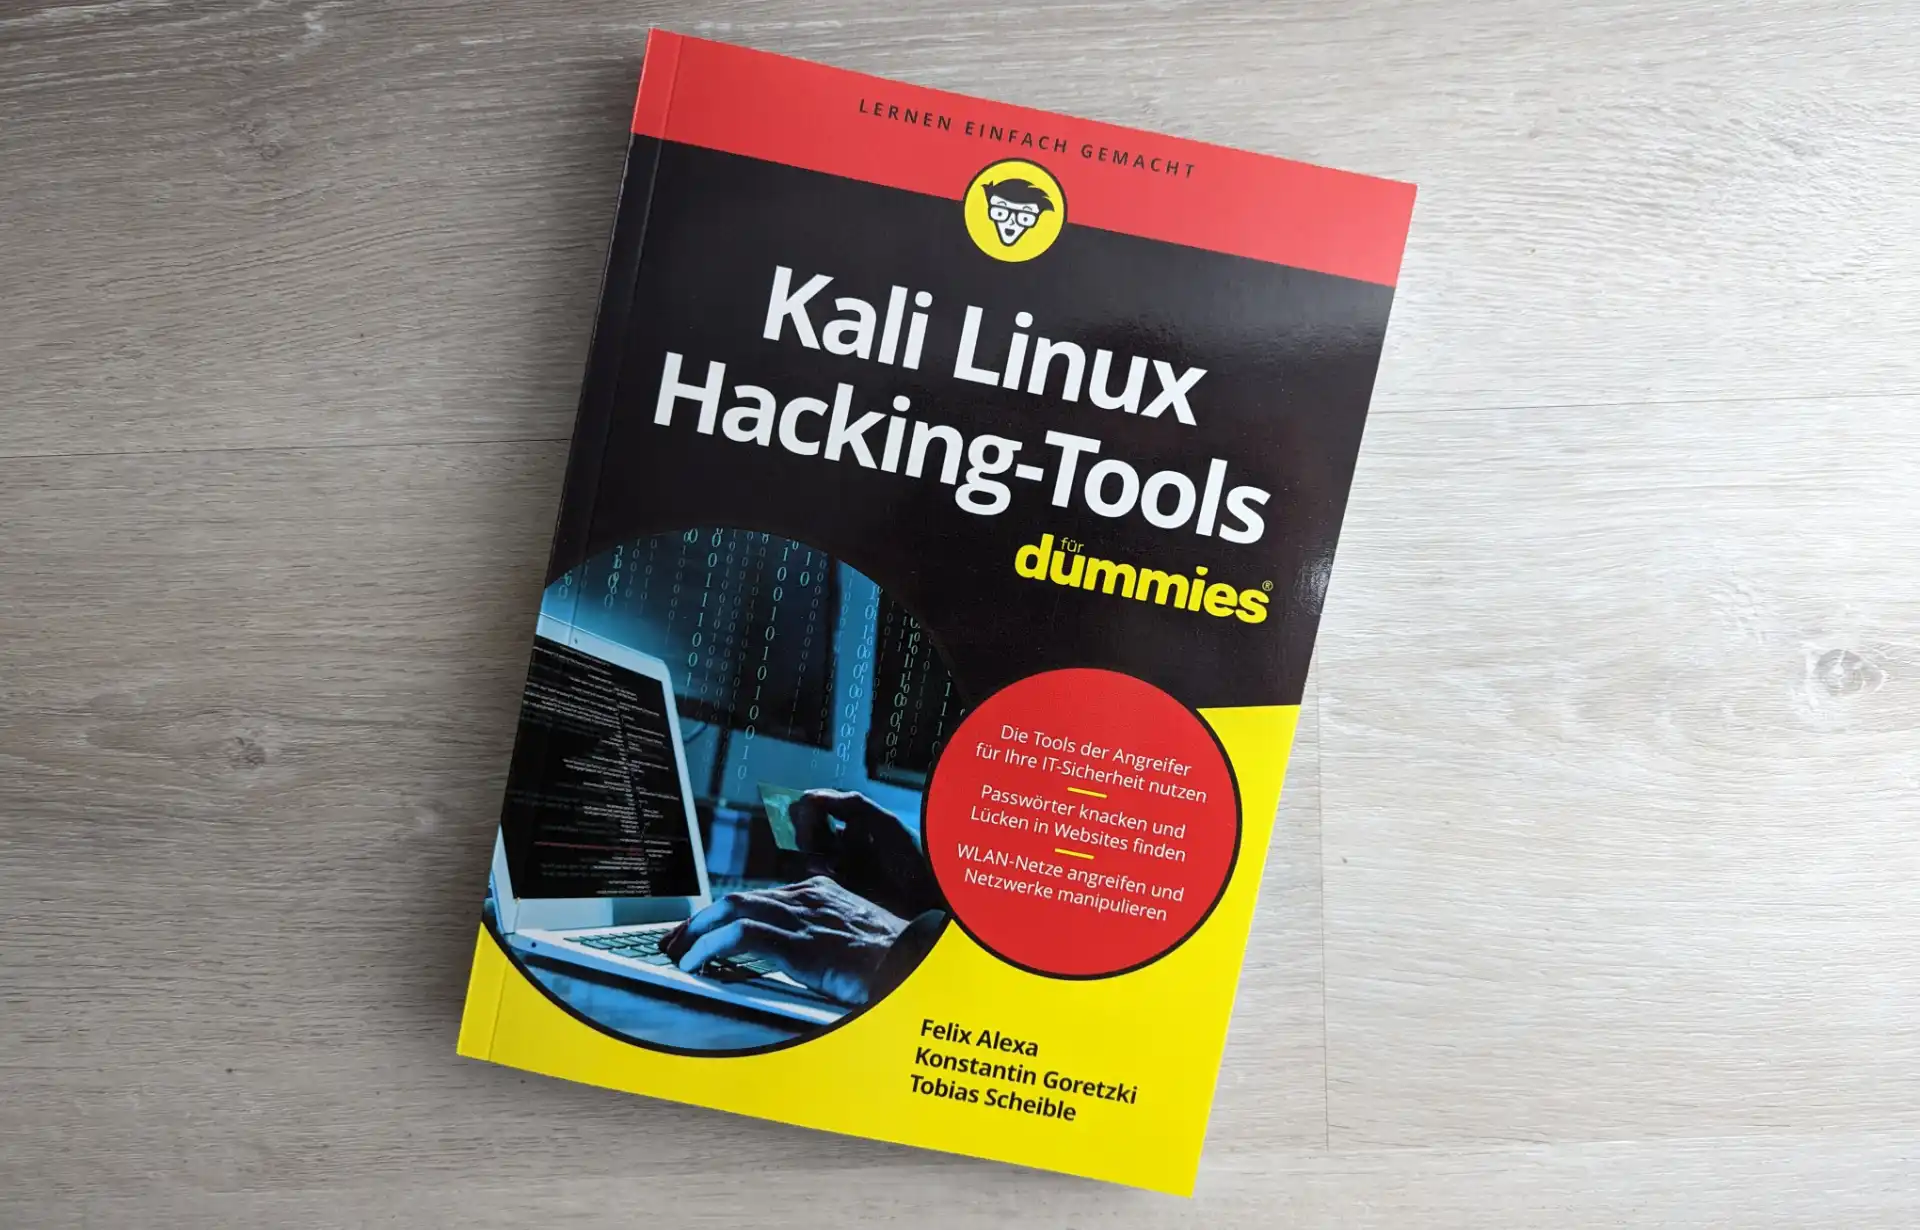 Mein Buch: Kali Linux Hacking-Tools